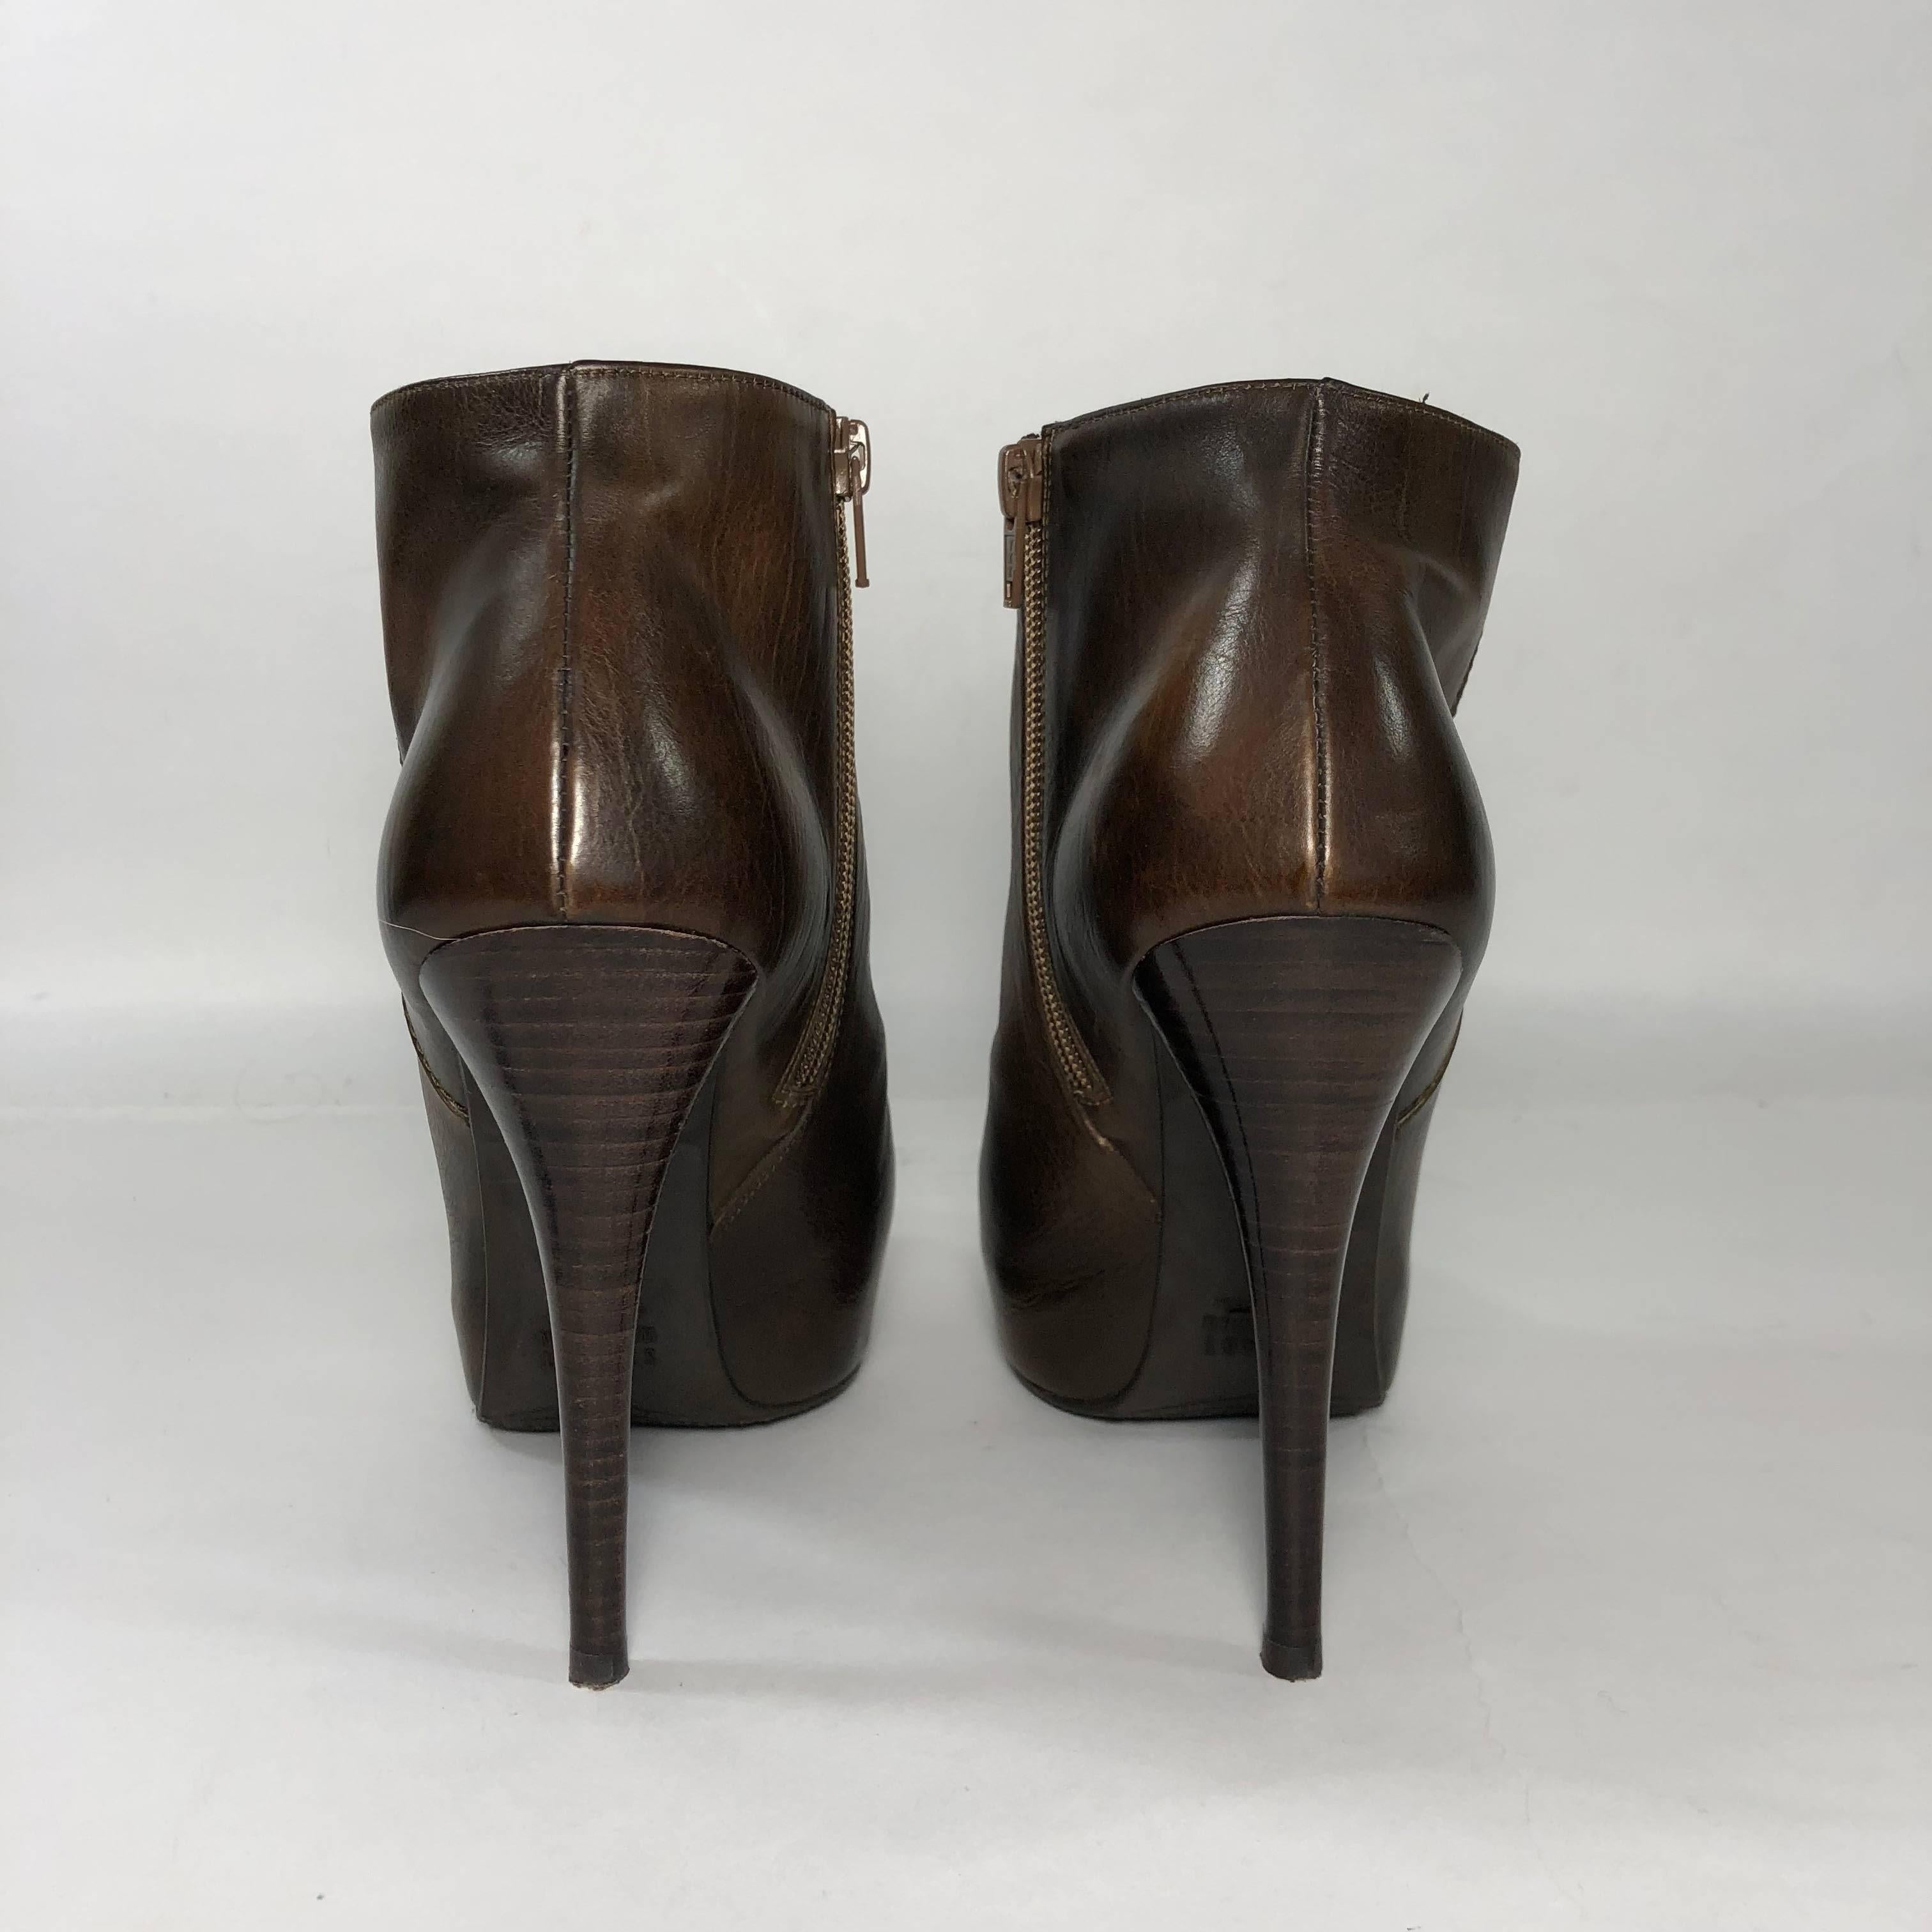 Stuart Weitzman Stiletto Ankle Boot Platform in Burnished Brown Leather In New Condition For Sale In Saint Charles, IL